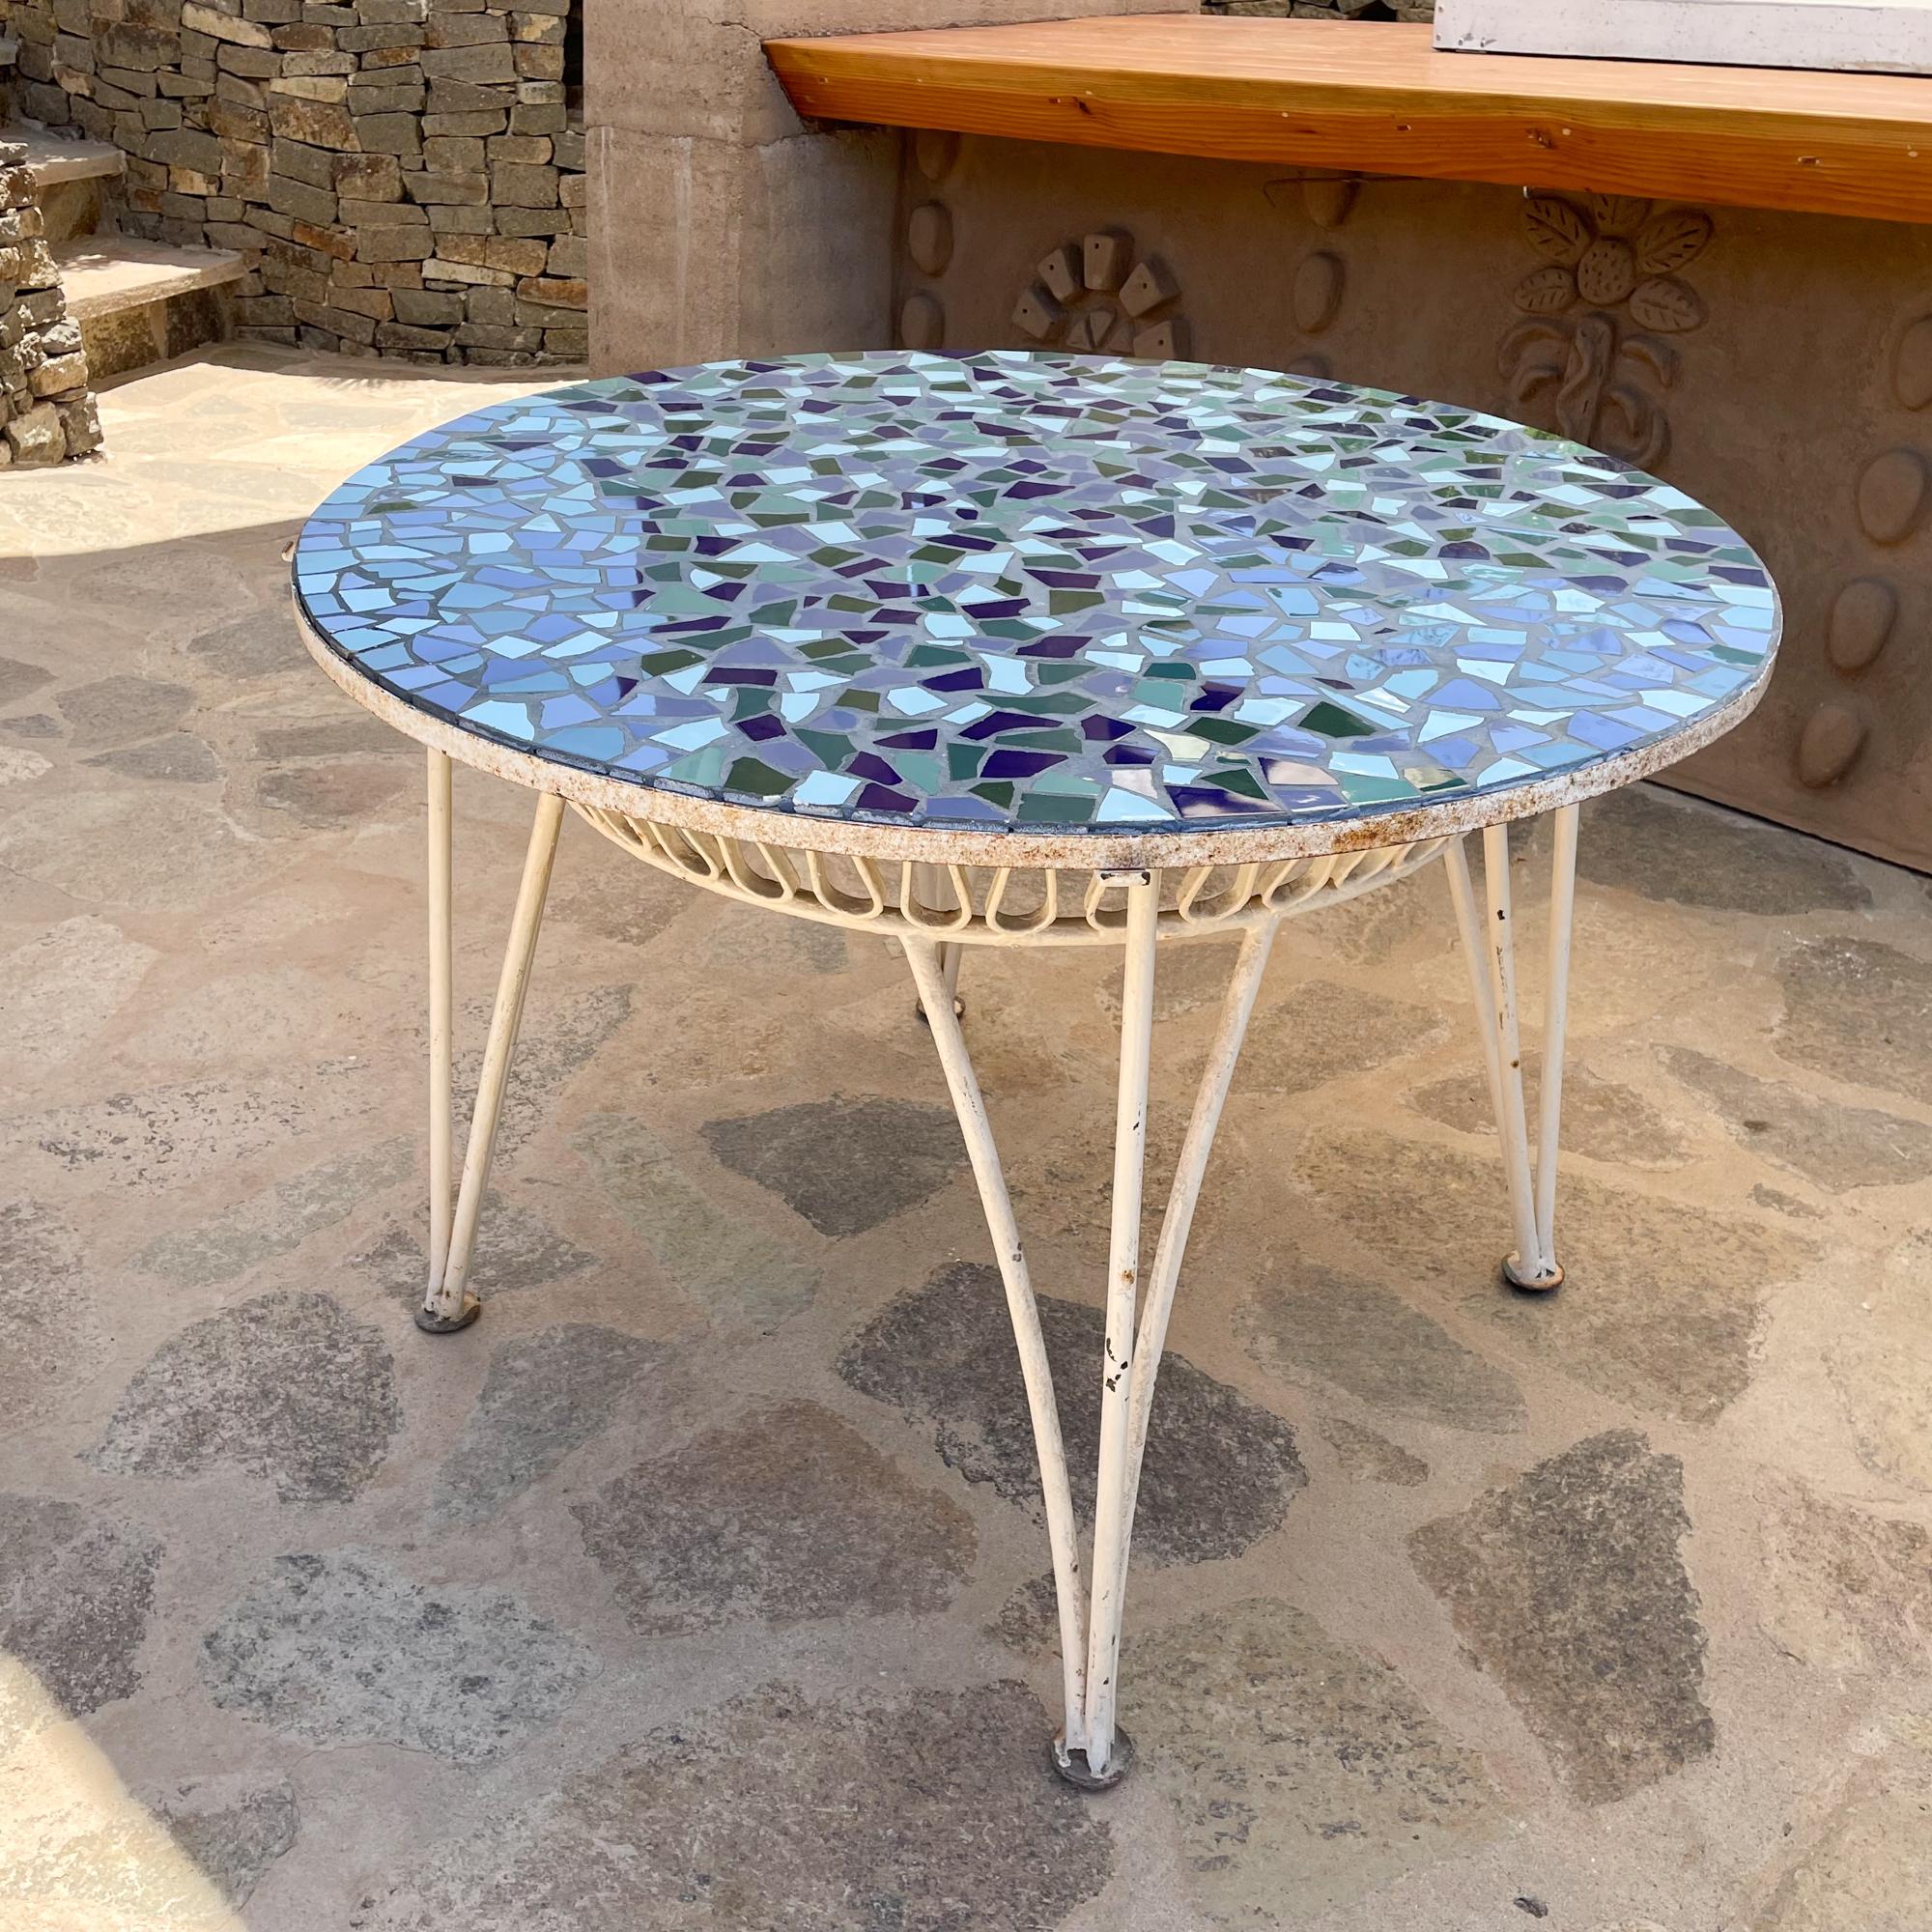 Maurizio Tempestini for Salterini round patio dining table wrought iron ribbon antique white with blue mosaic tile top.
Cute Scallop Curly Q Ribbon Swirl detail on wrought iron base. Beautiful blue sea Mosaic tile top.
Measures: 29.25t x 42